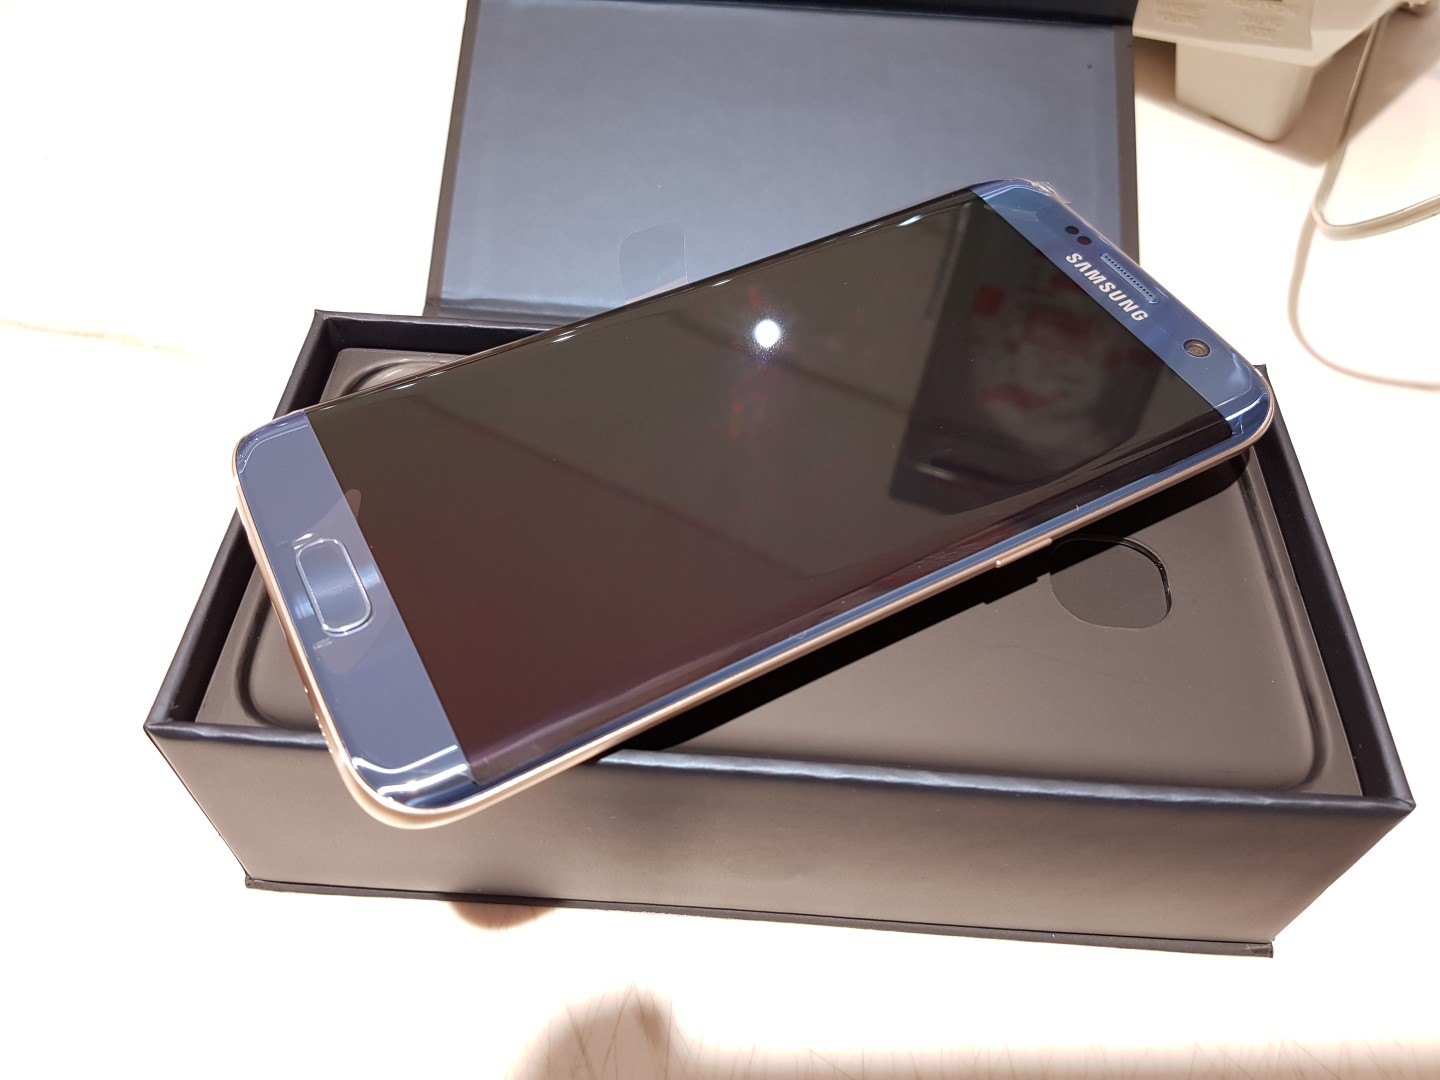 Check out these pictures of the Blue Coral Galaxy S7 edge ... - 1440 x 1080 jpeg 185kB